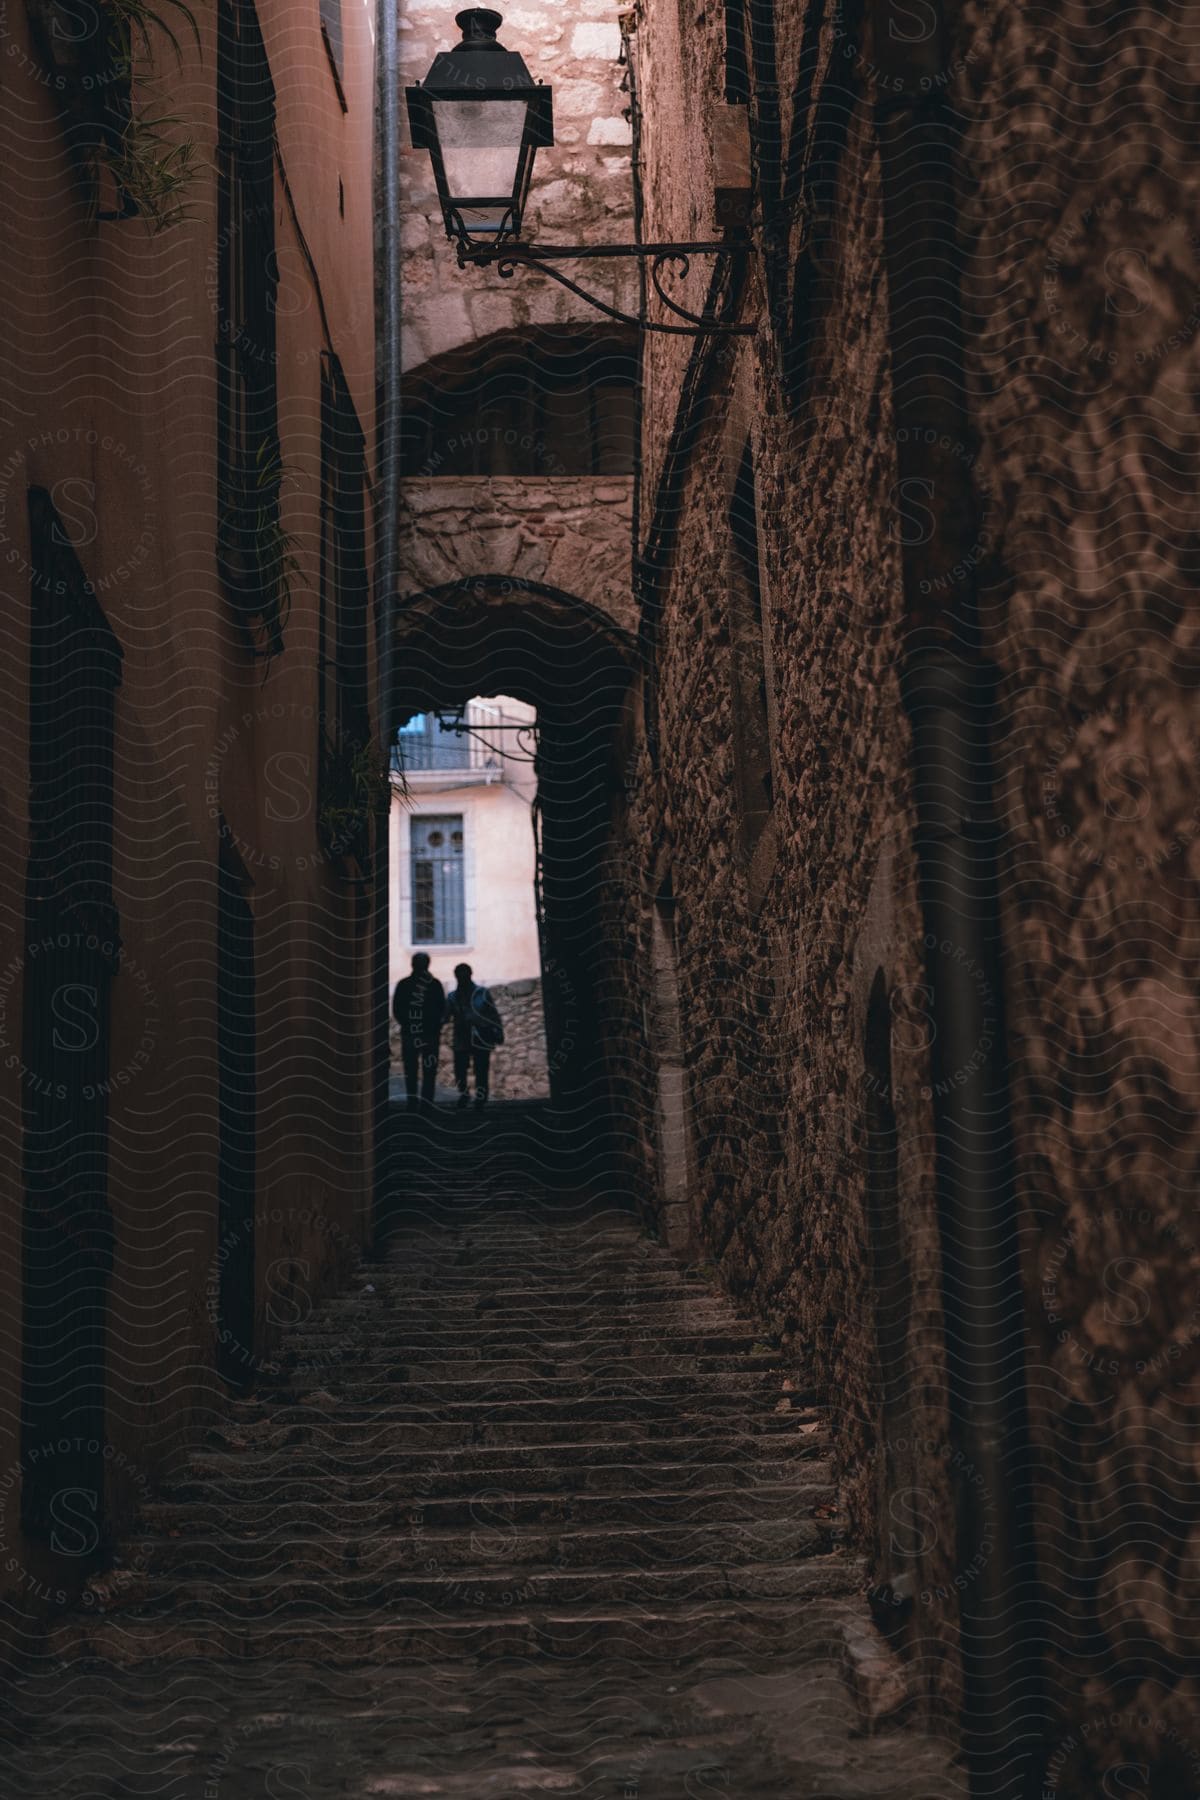 Two people going down steps in an alley between a smooth wall and a rough wall